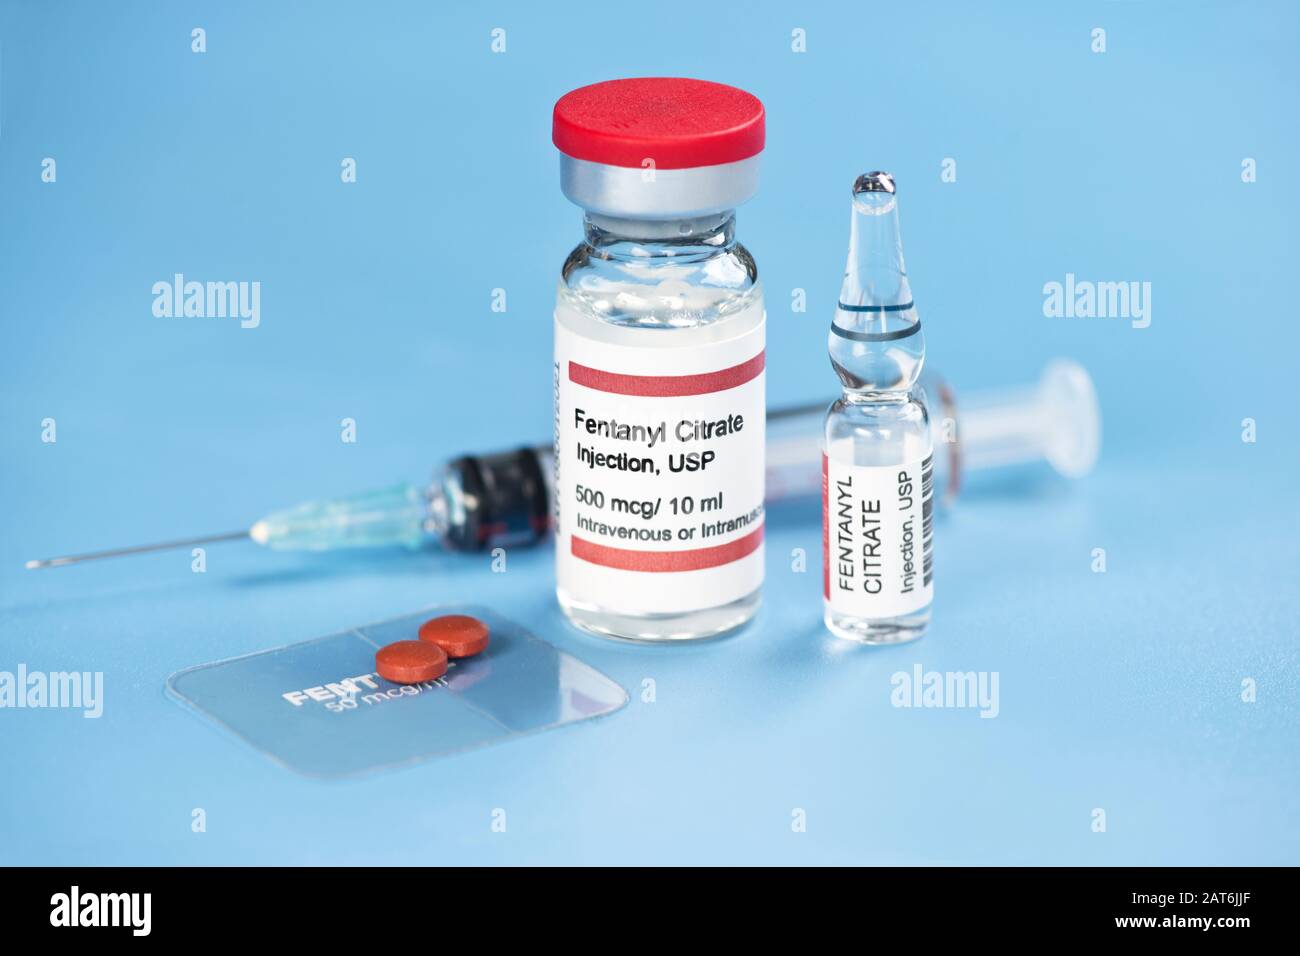 Fentanyl citrate injection ampule, vial, clear fentanyl dermal patch, tablets and syringe on blue tray. Stock Photo